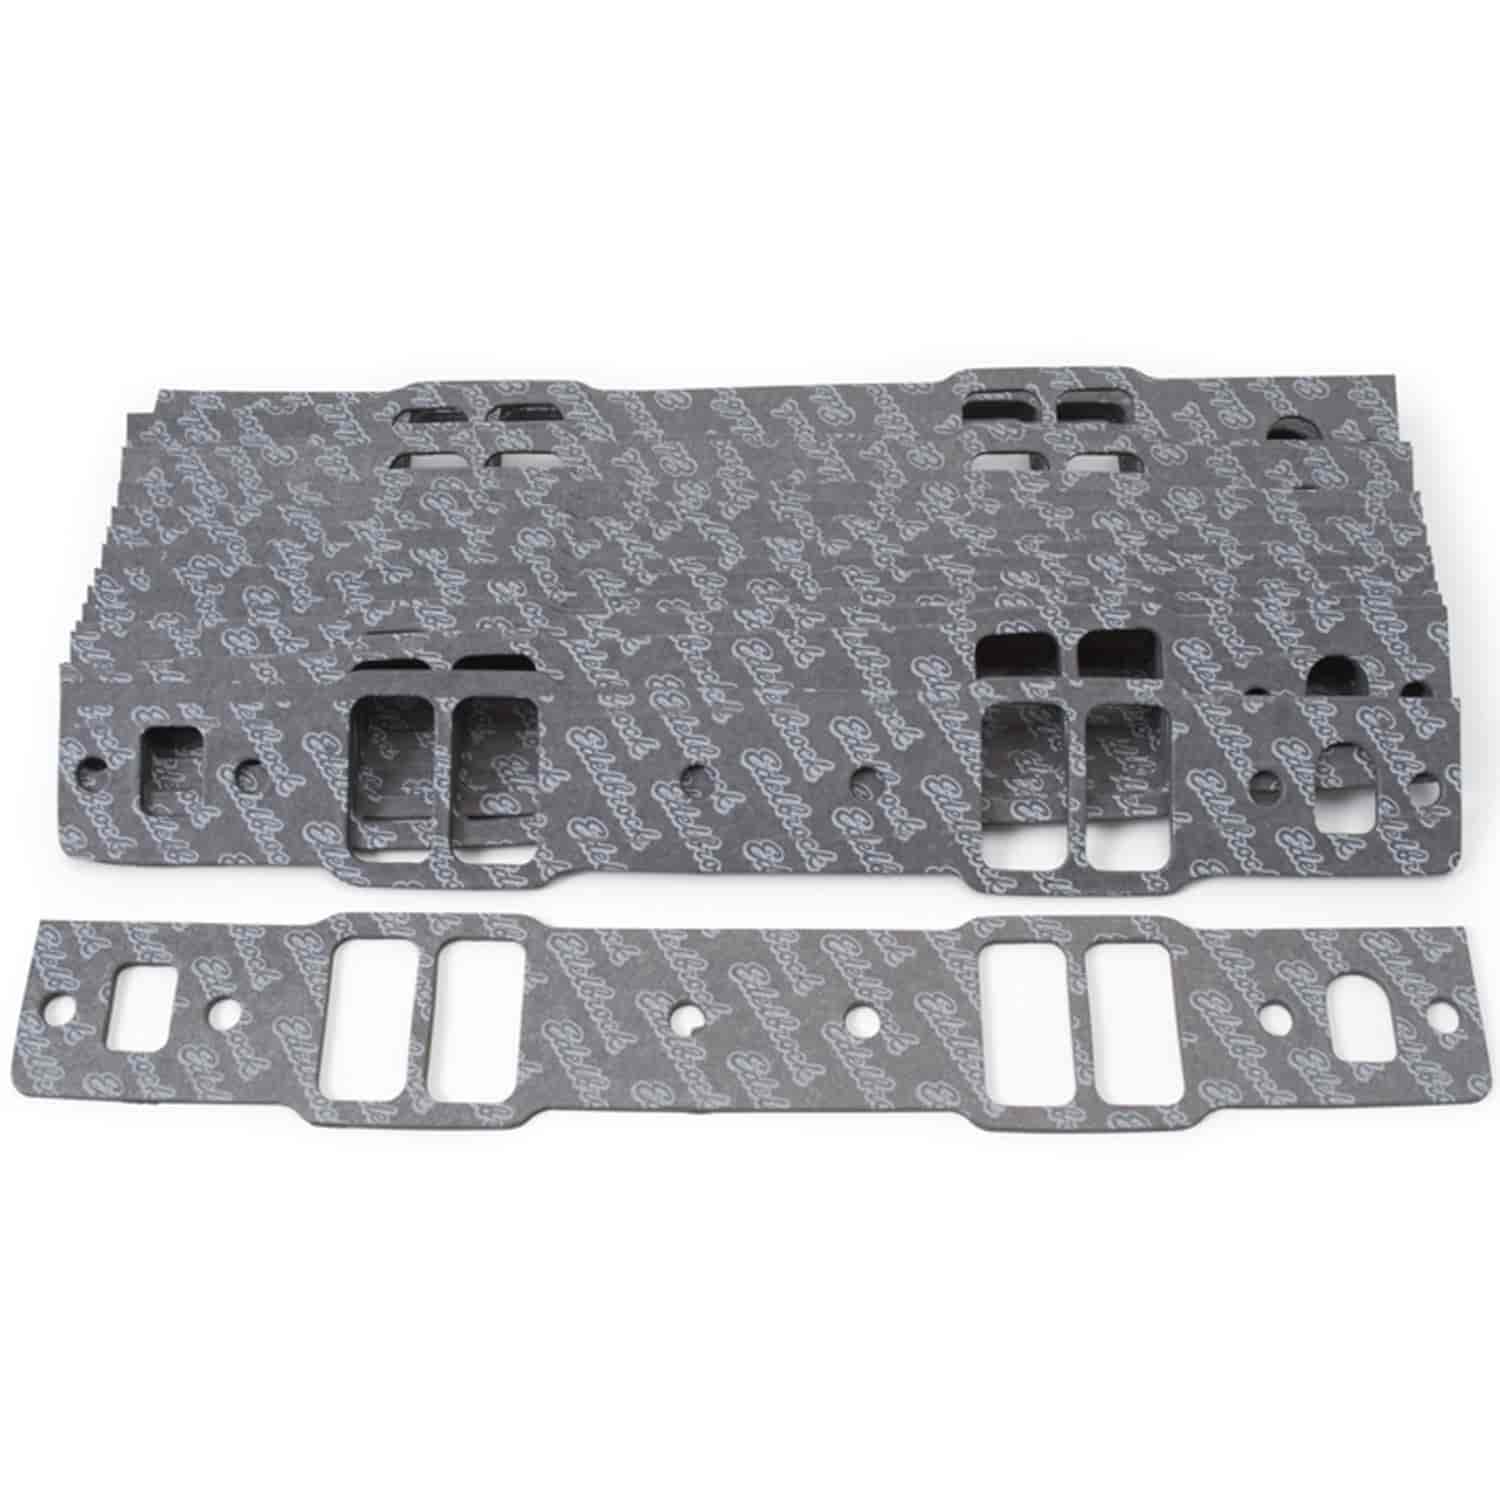 Intake Gaskets for Small Block Chevy Vortec Bowtie